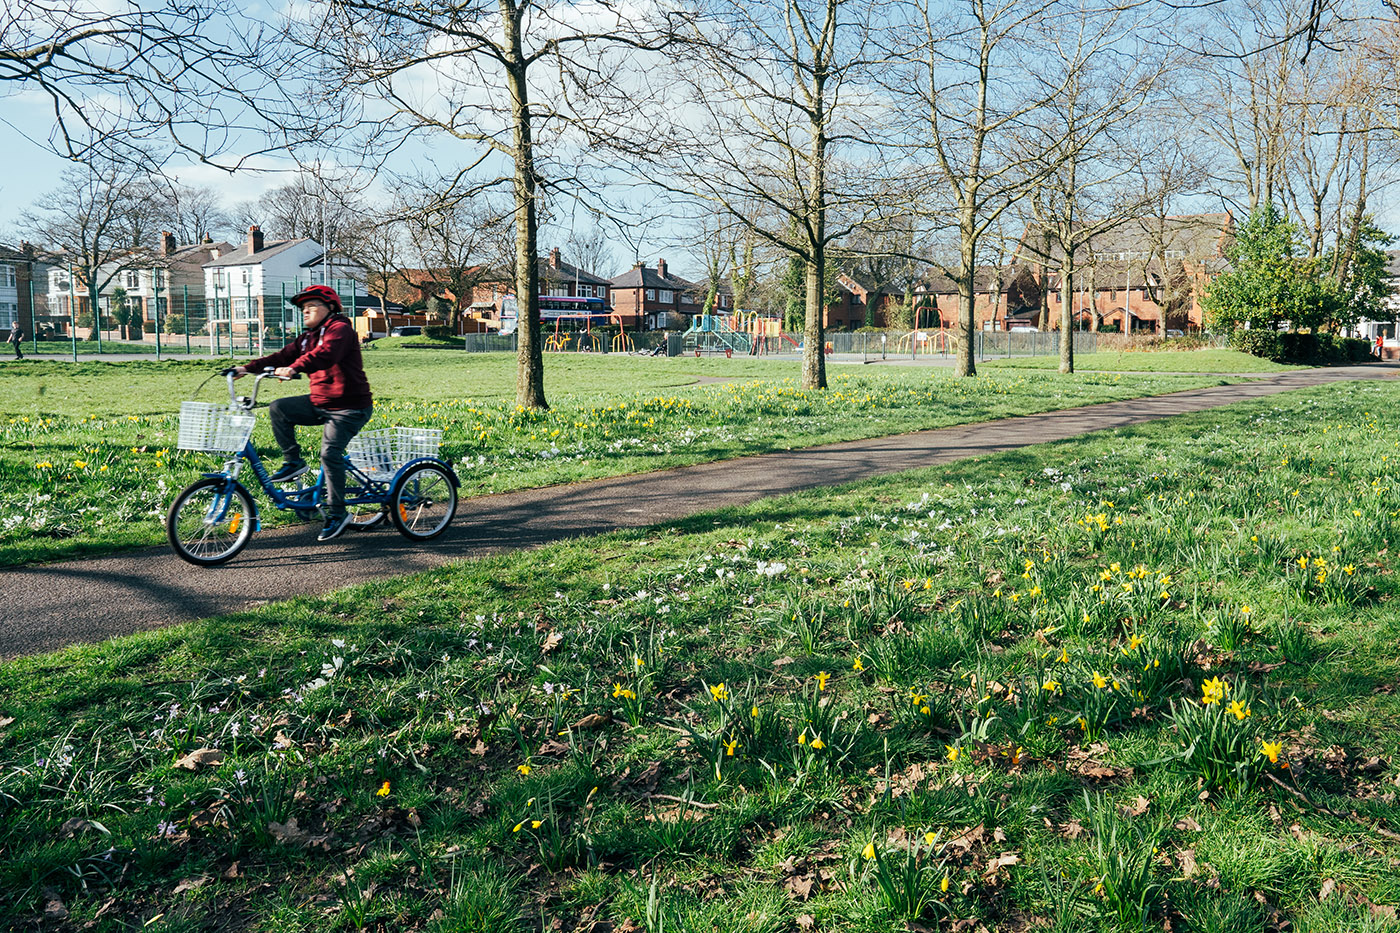 young man on a bike, riding through a park on a sunny day